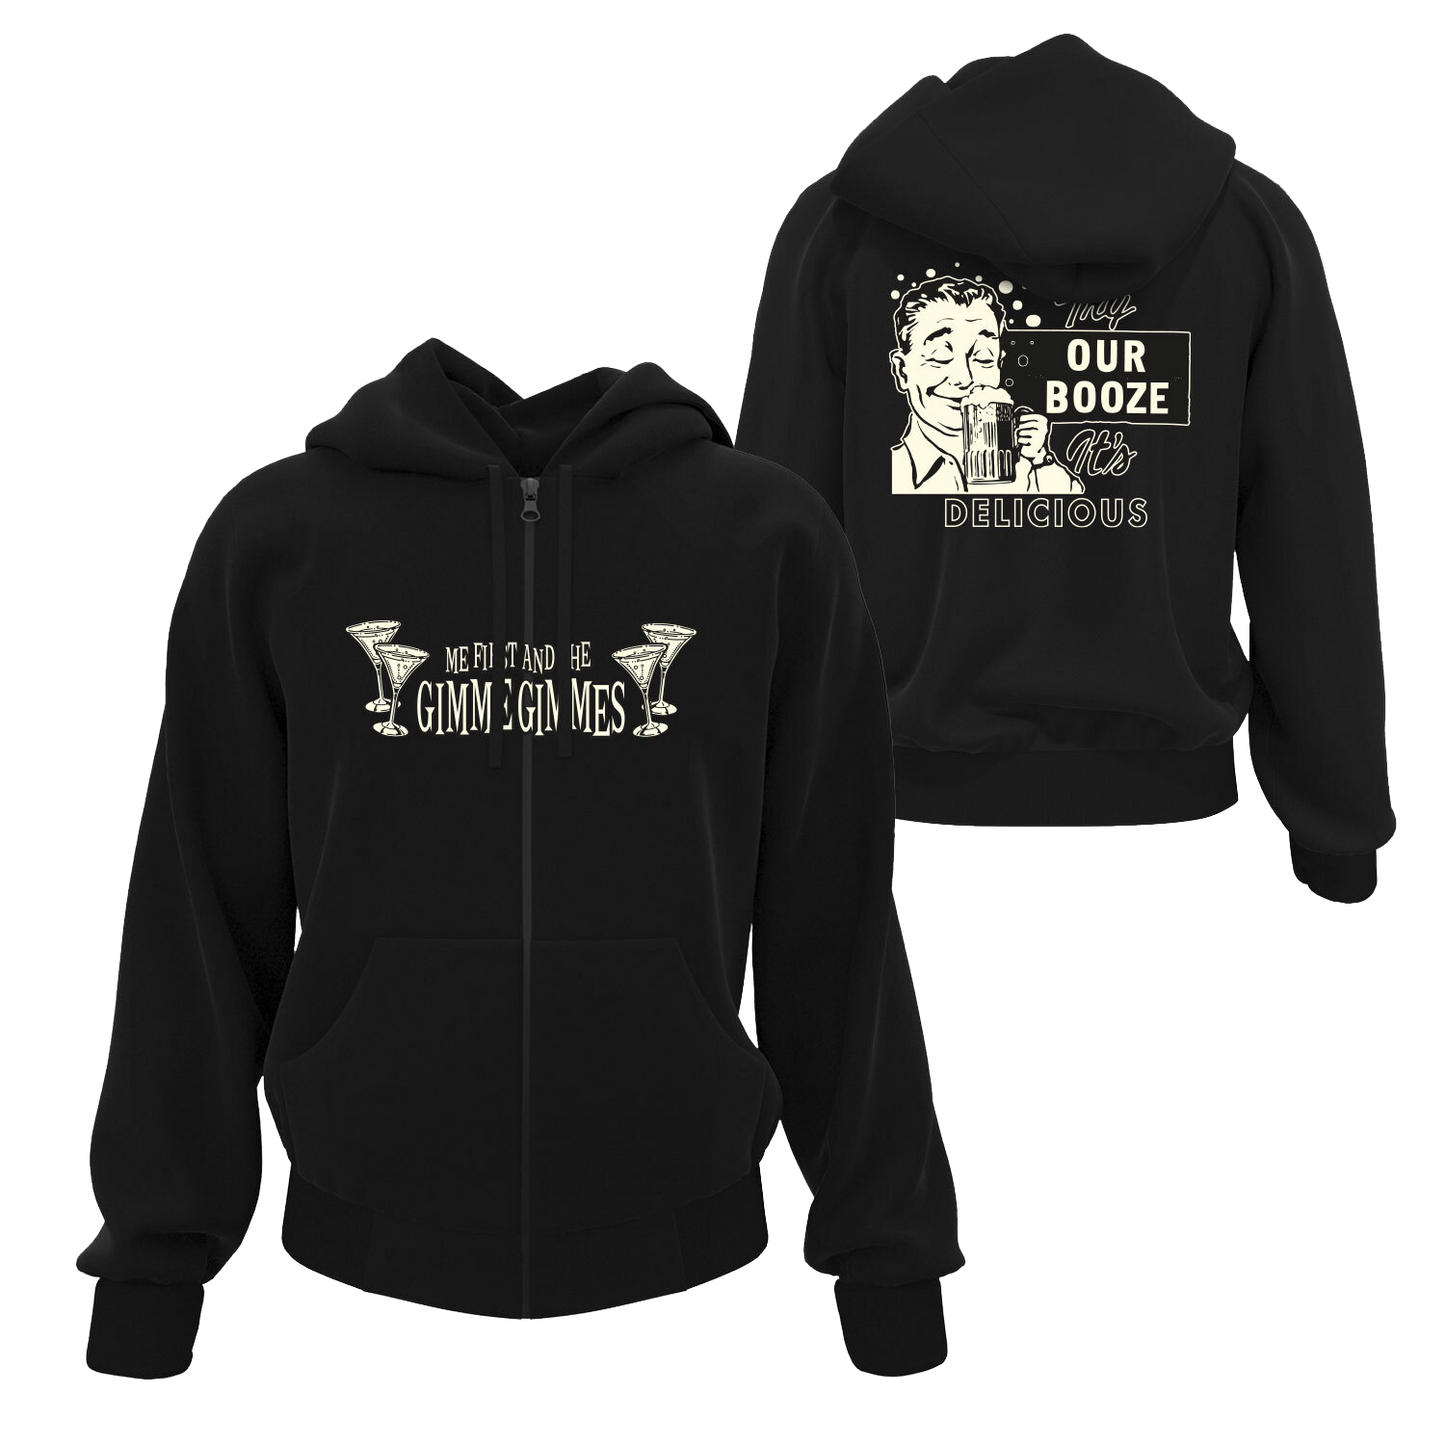 Try Our Booze Zipper Hoodie